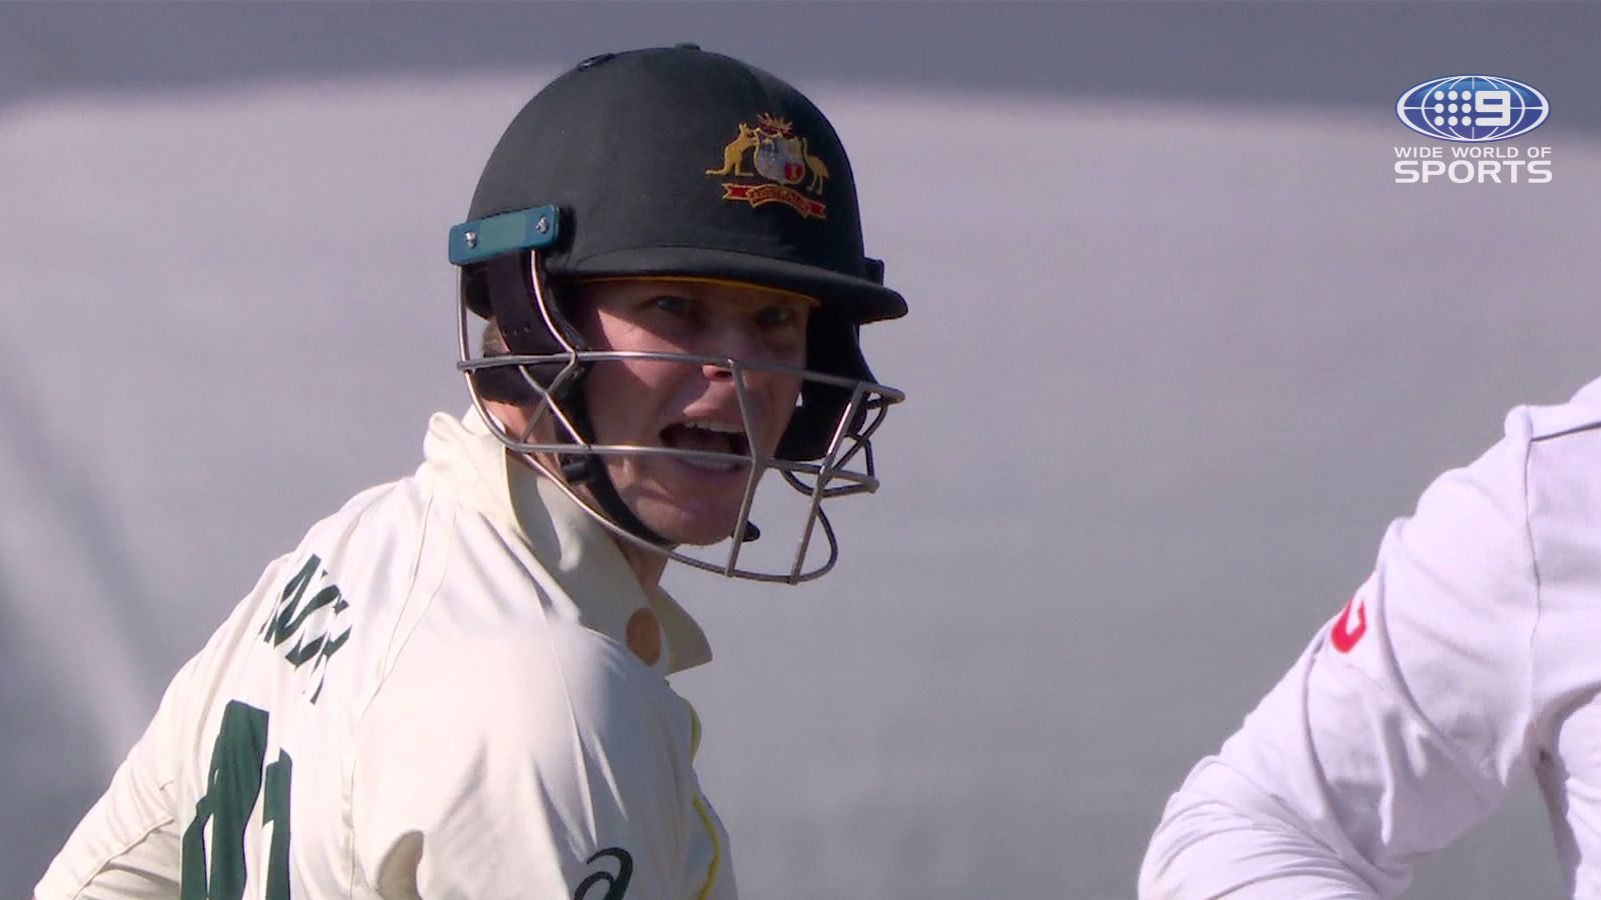 Steve Smith yells &quot;Hey!&quot; at Jonny Bairstow after being dismissed by Moeen Ali.